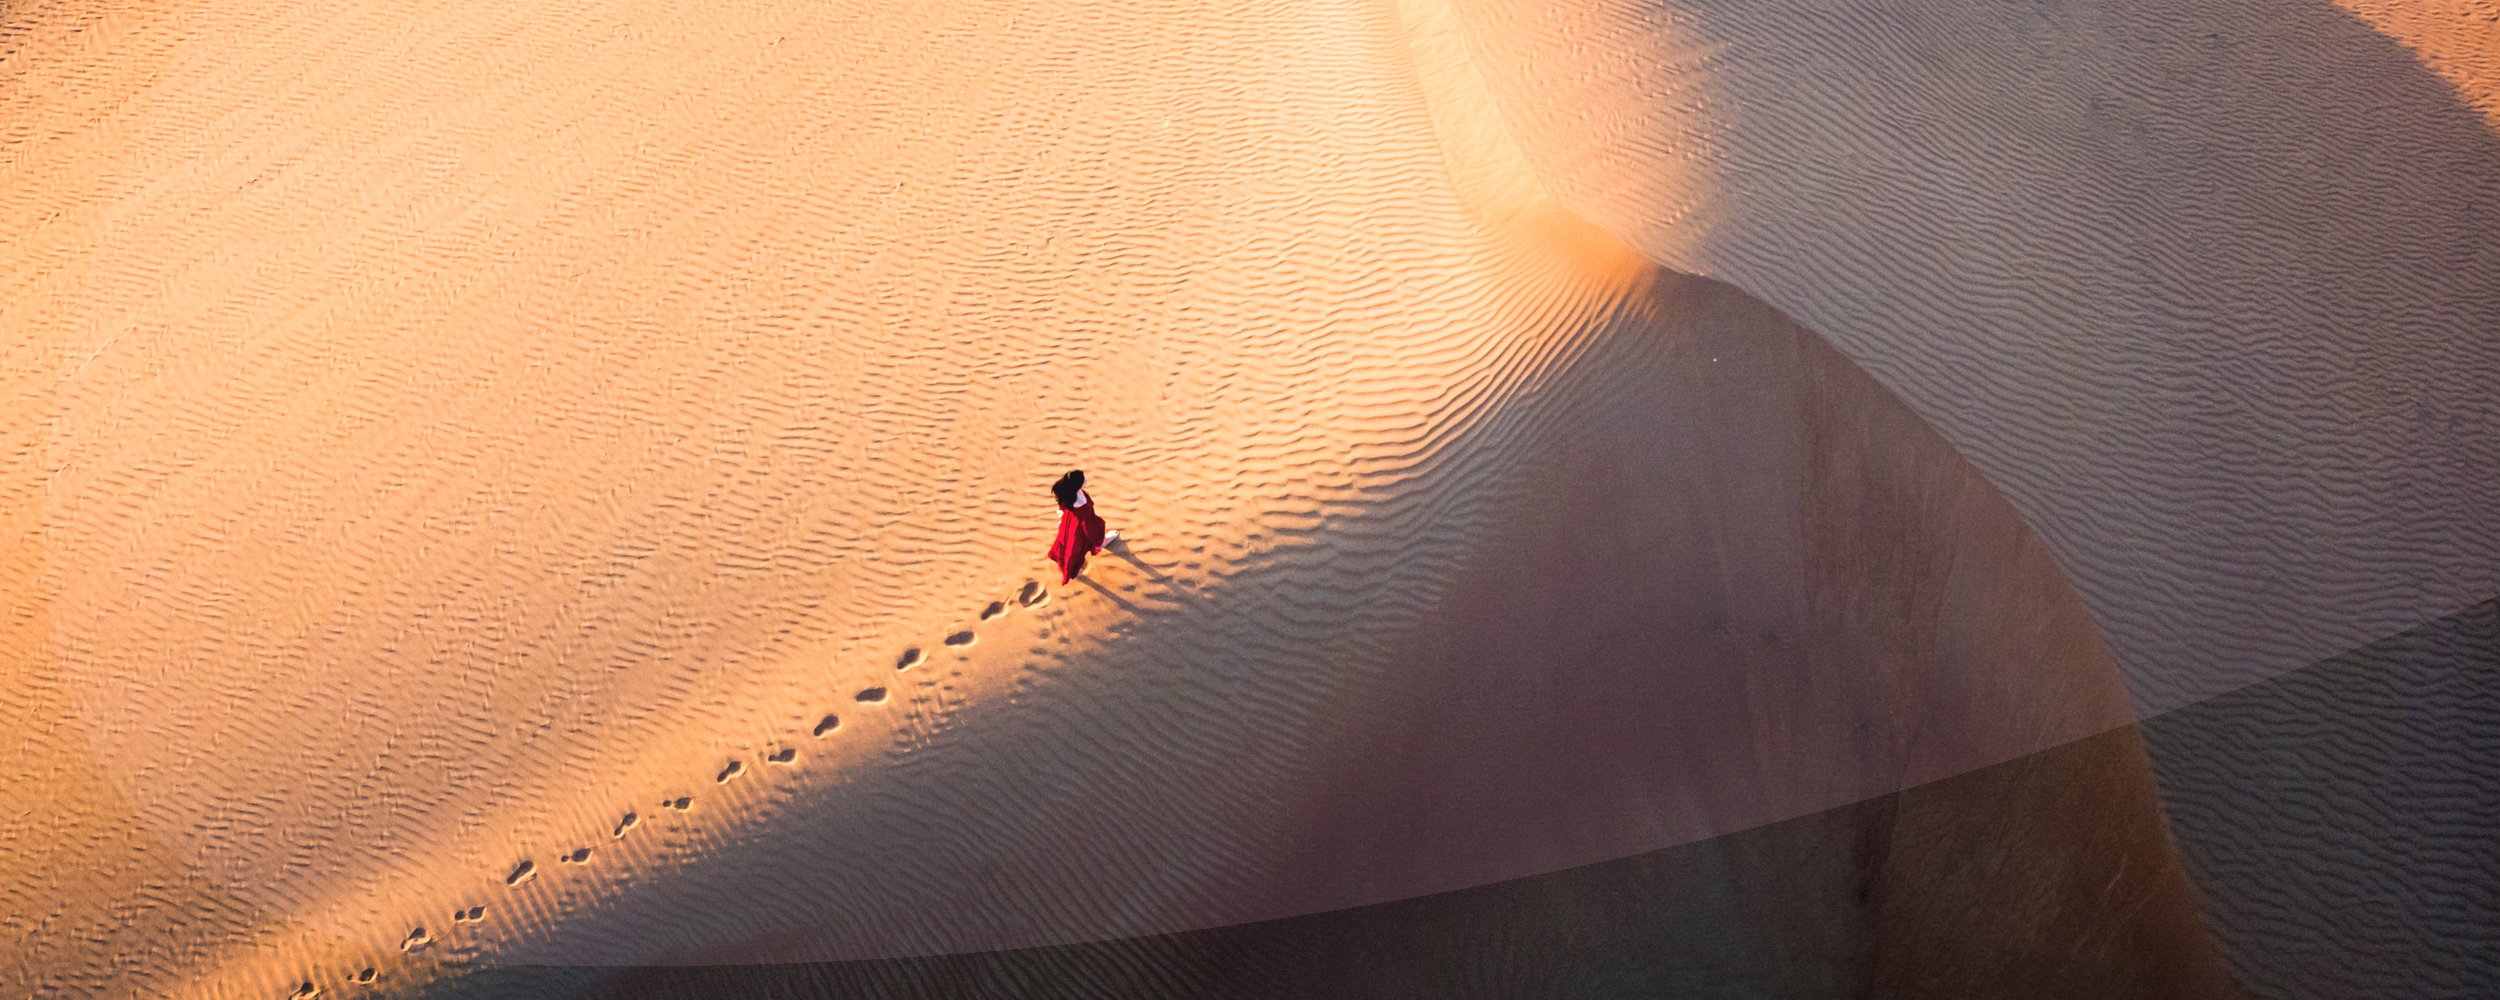 Woman walking in the desert during sunset aerial view.